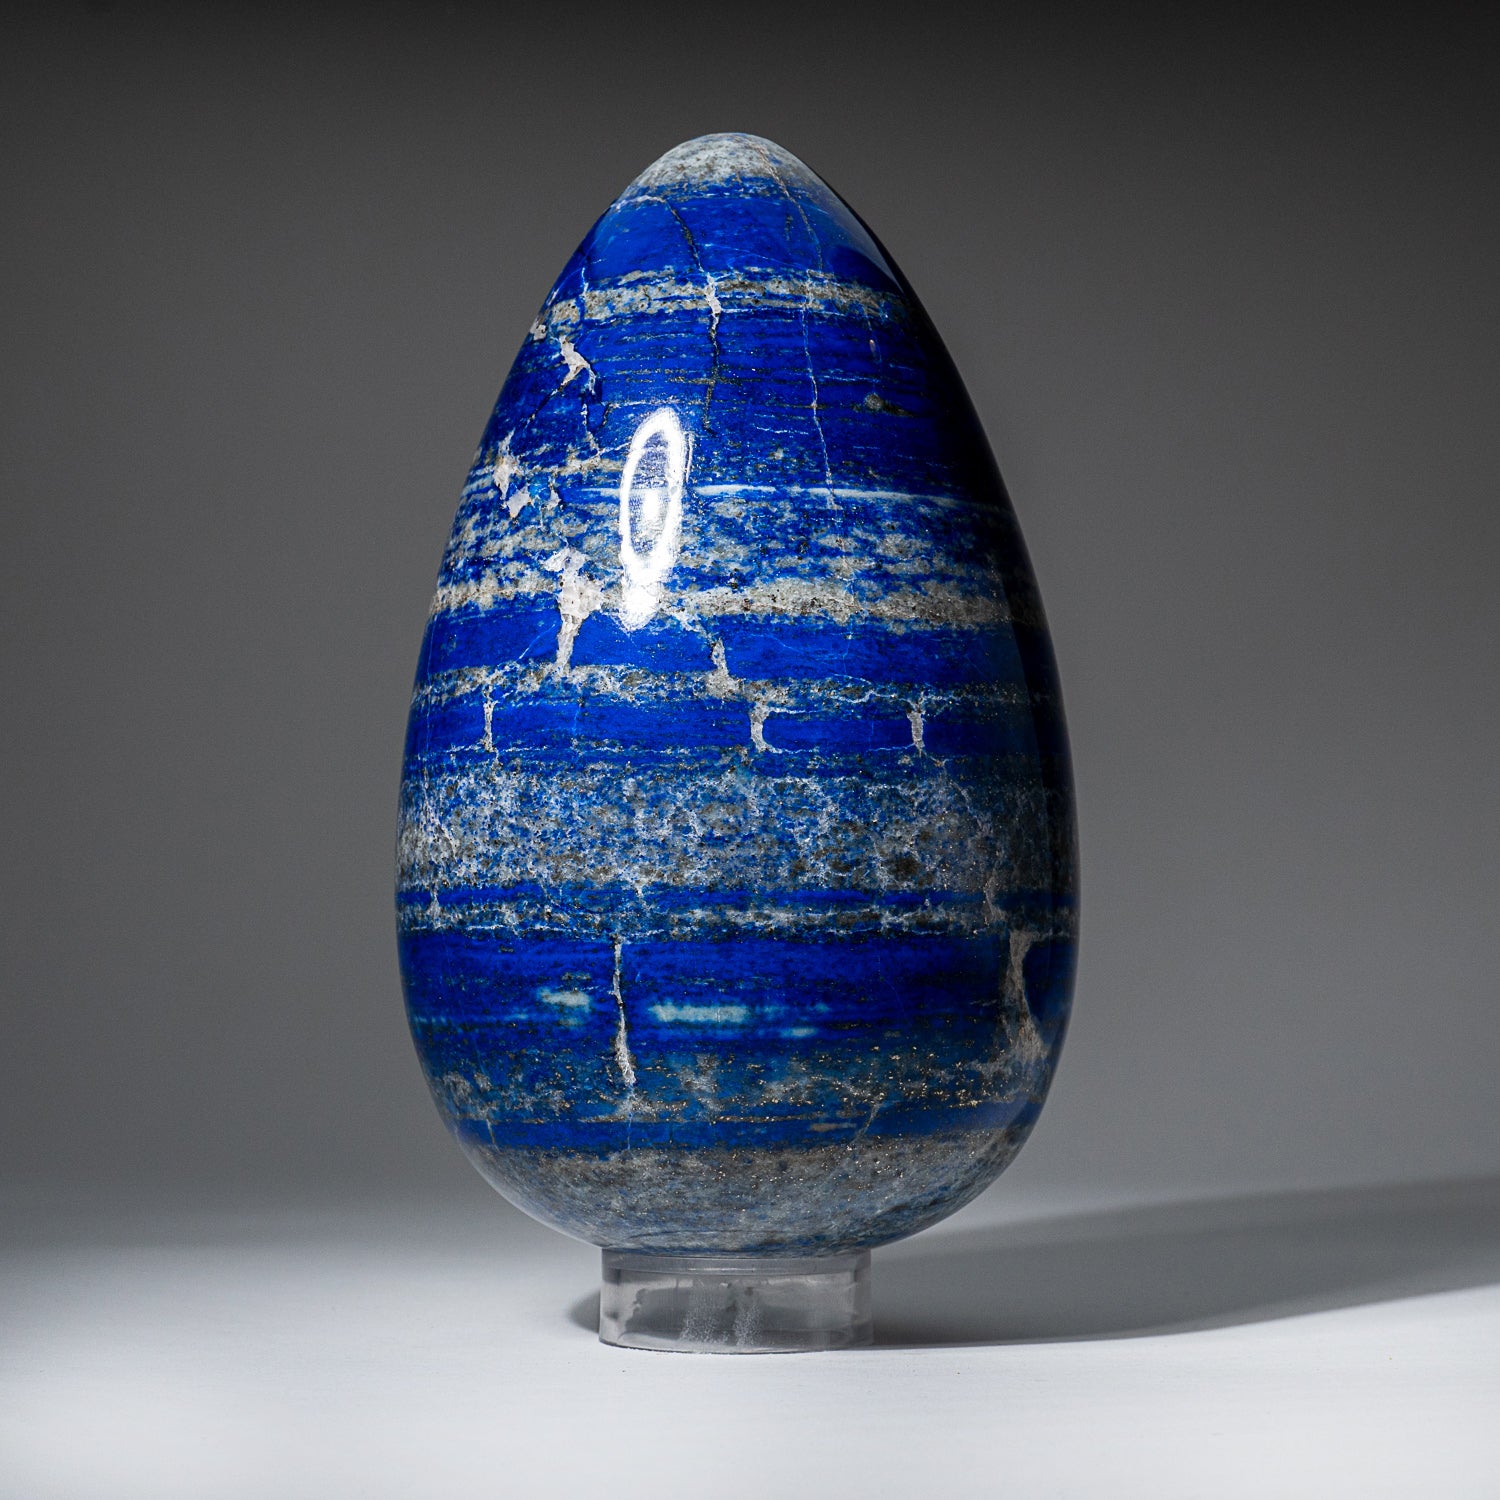 Genuine Polished Lapis Lazuli Egg from Afghanistan (7.9 lbs)